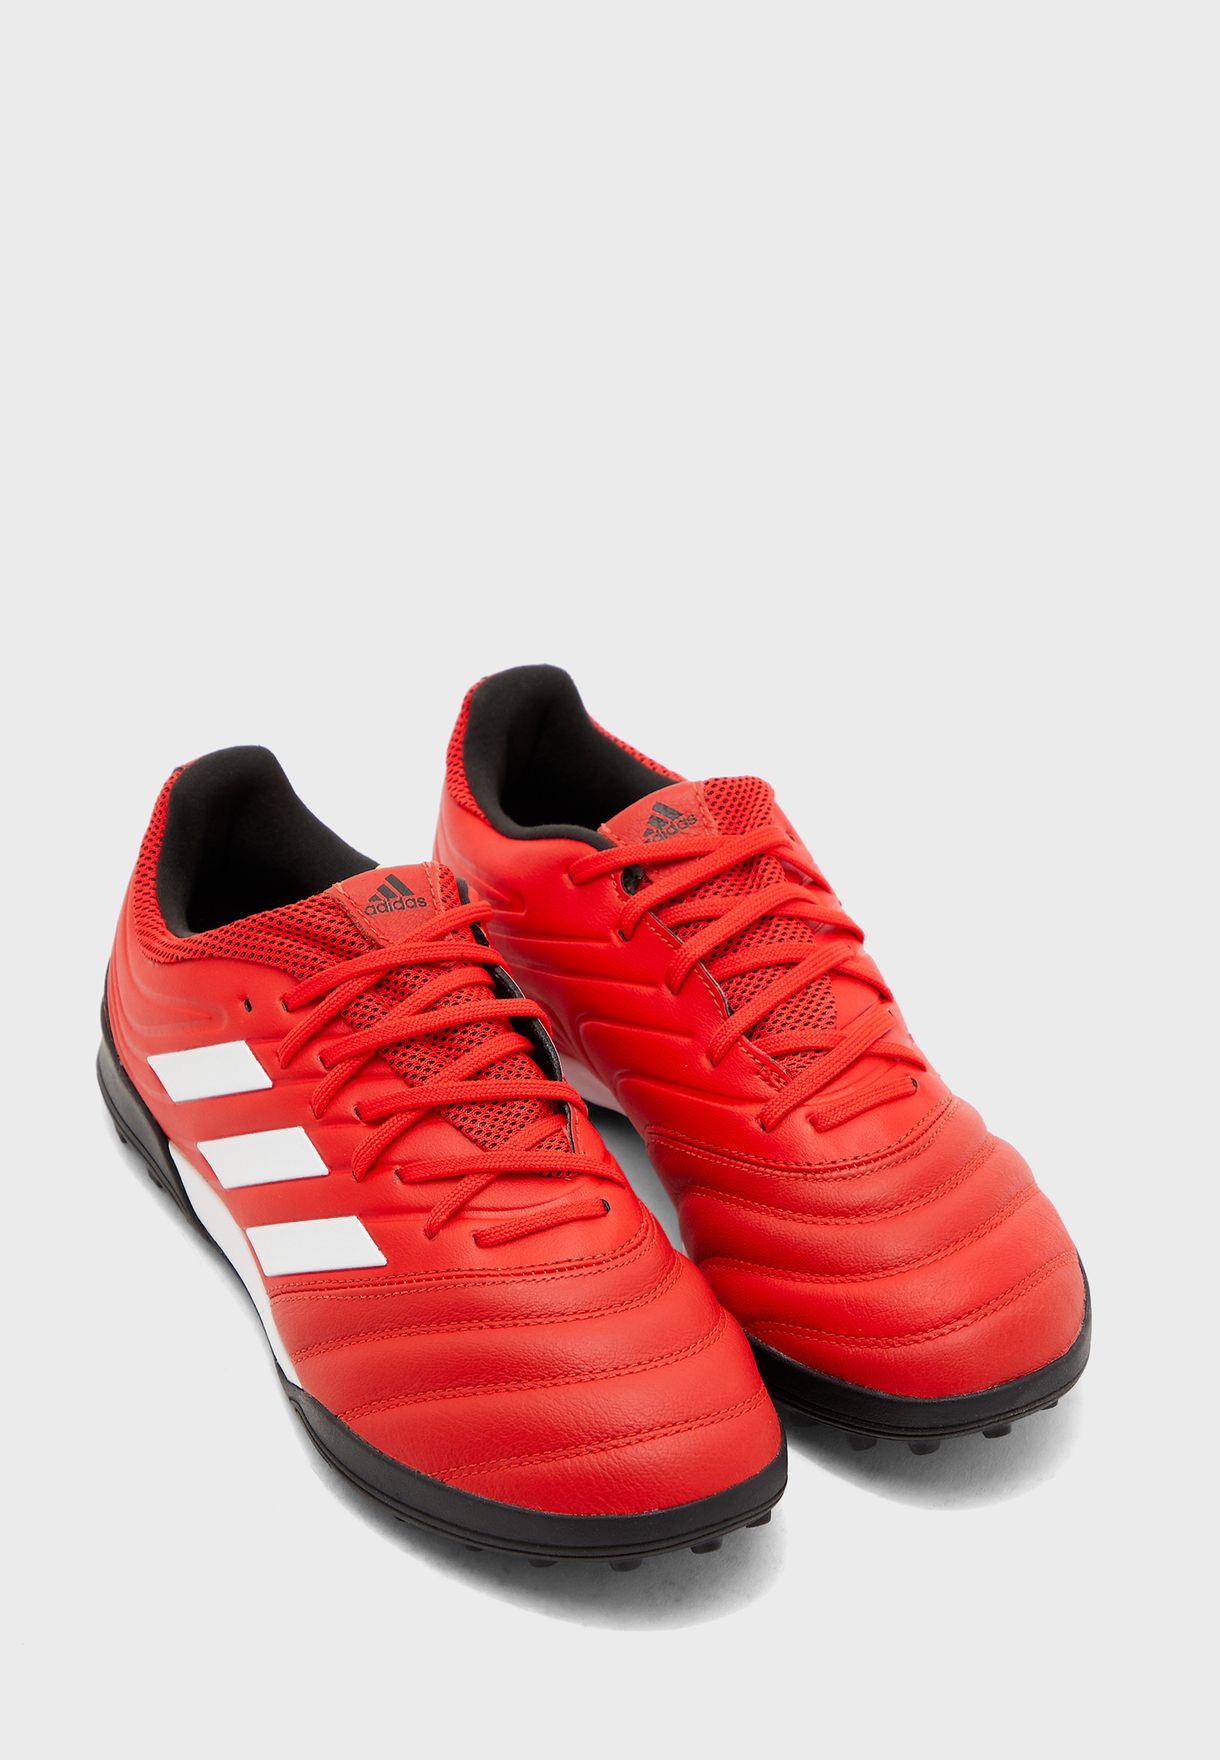 copa 20.3 red